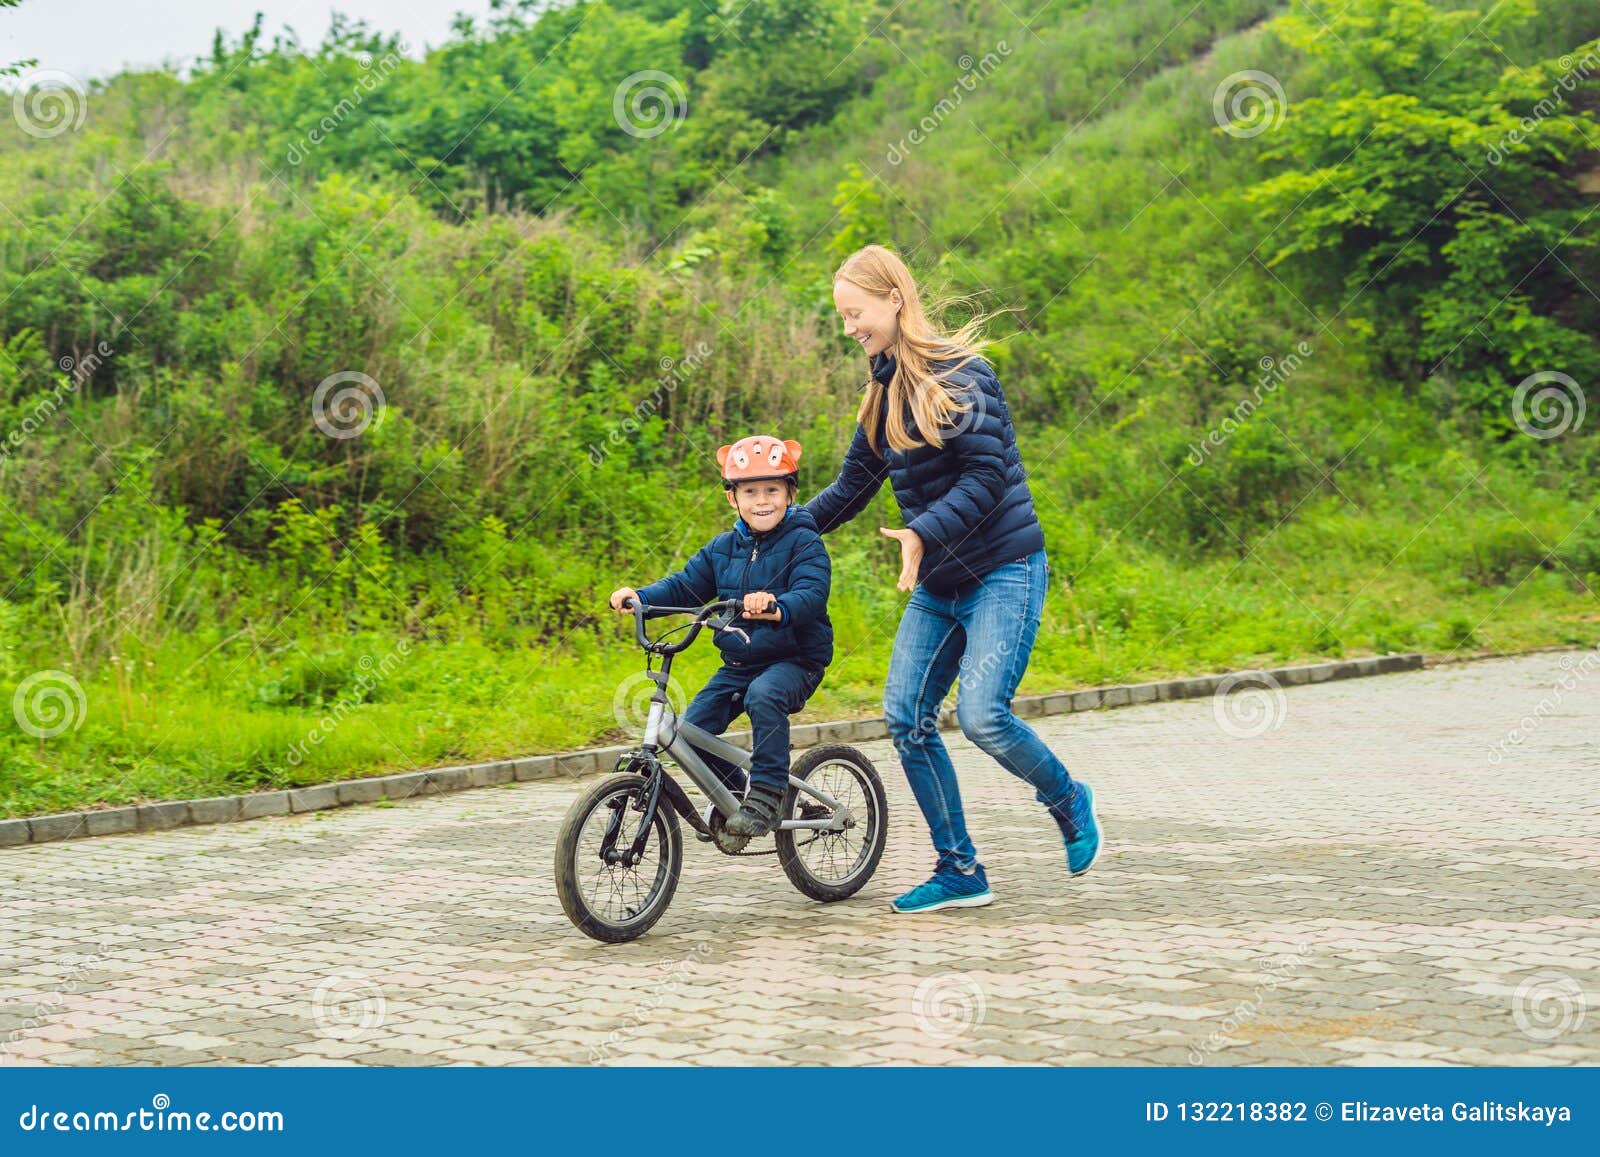 Mom Teaches Son To Ride a Bike in the Park Stock Photo